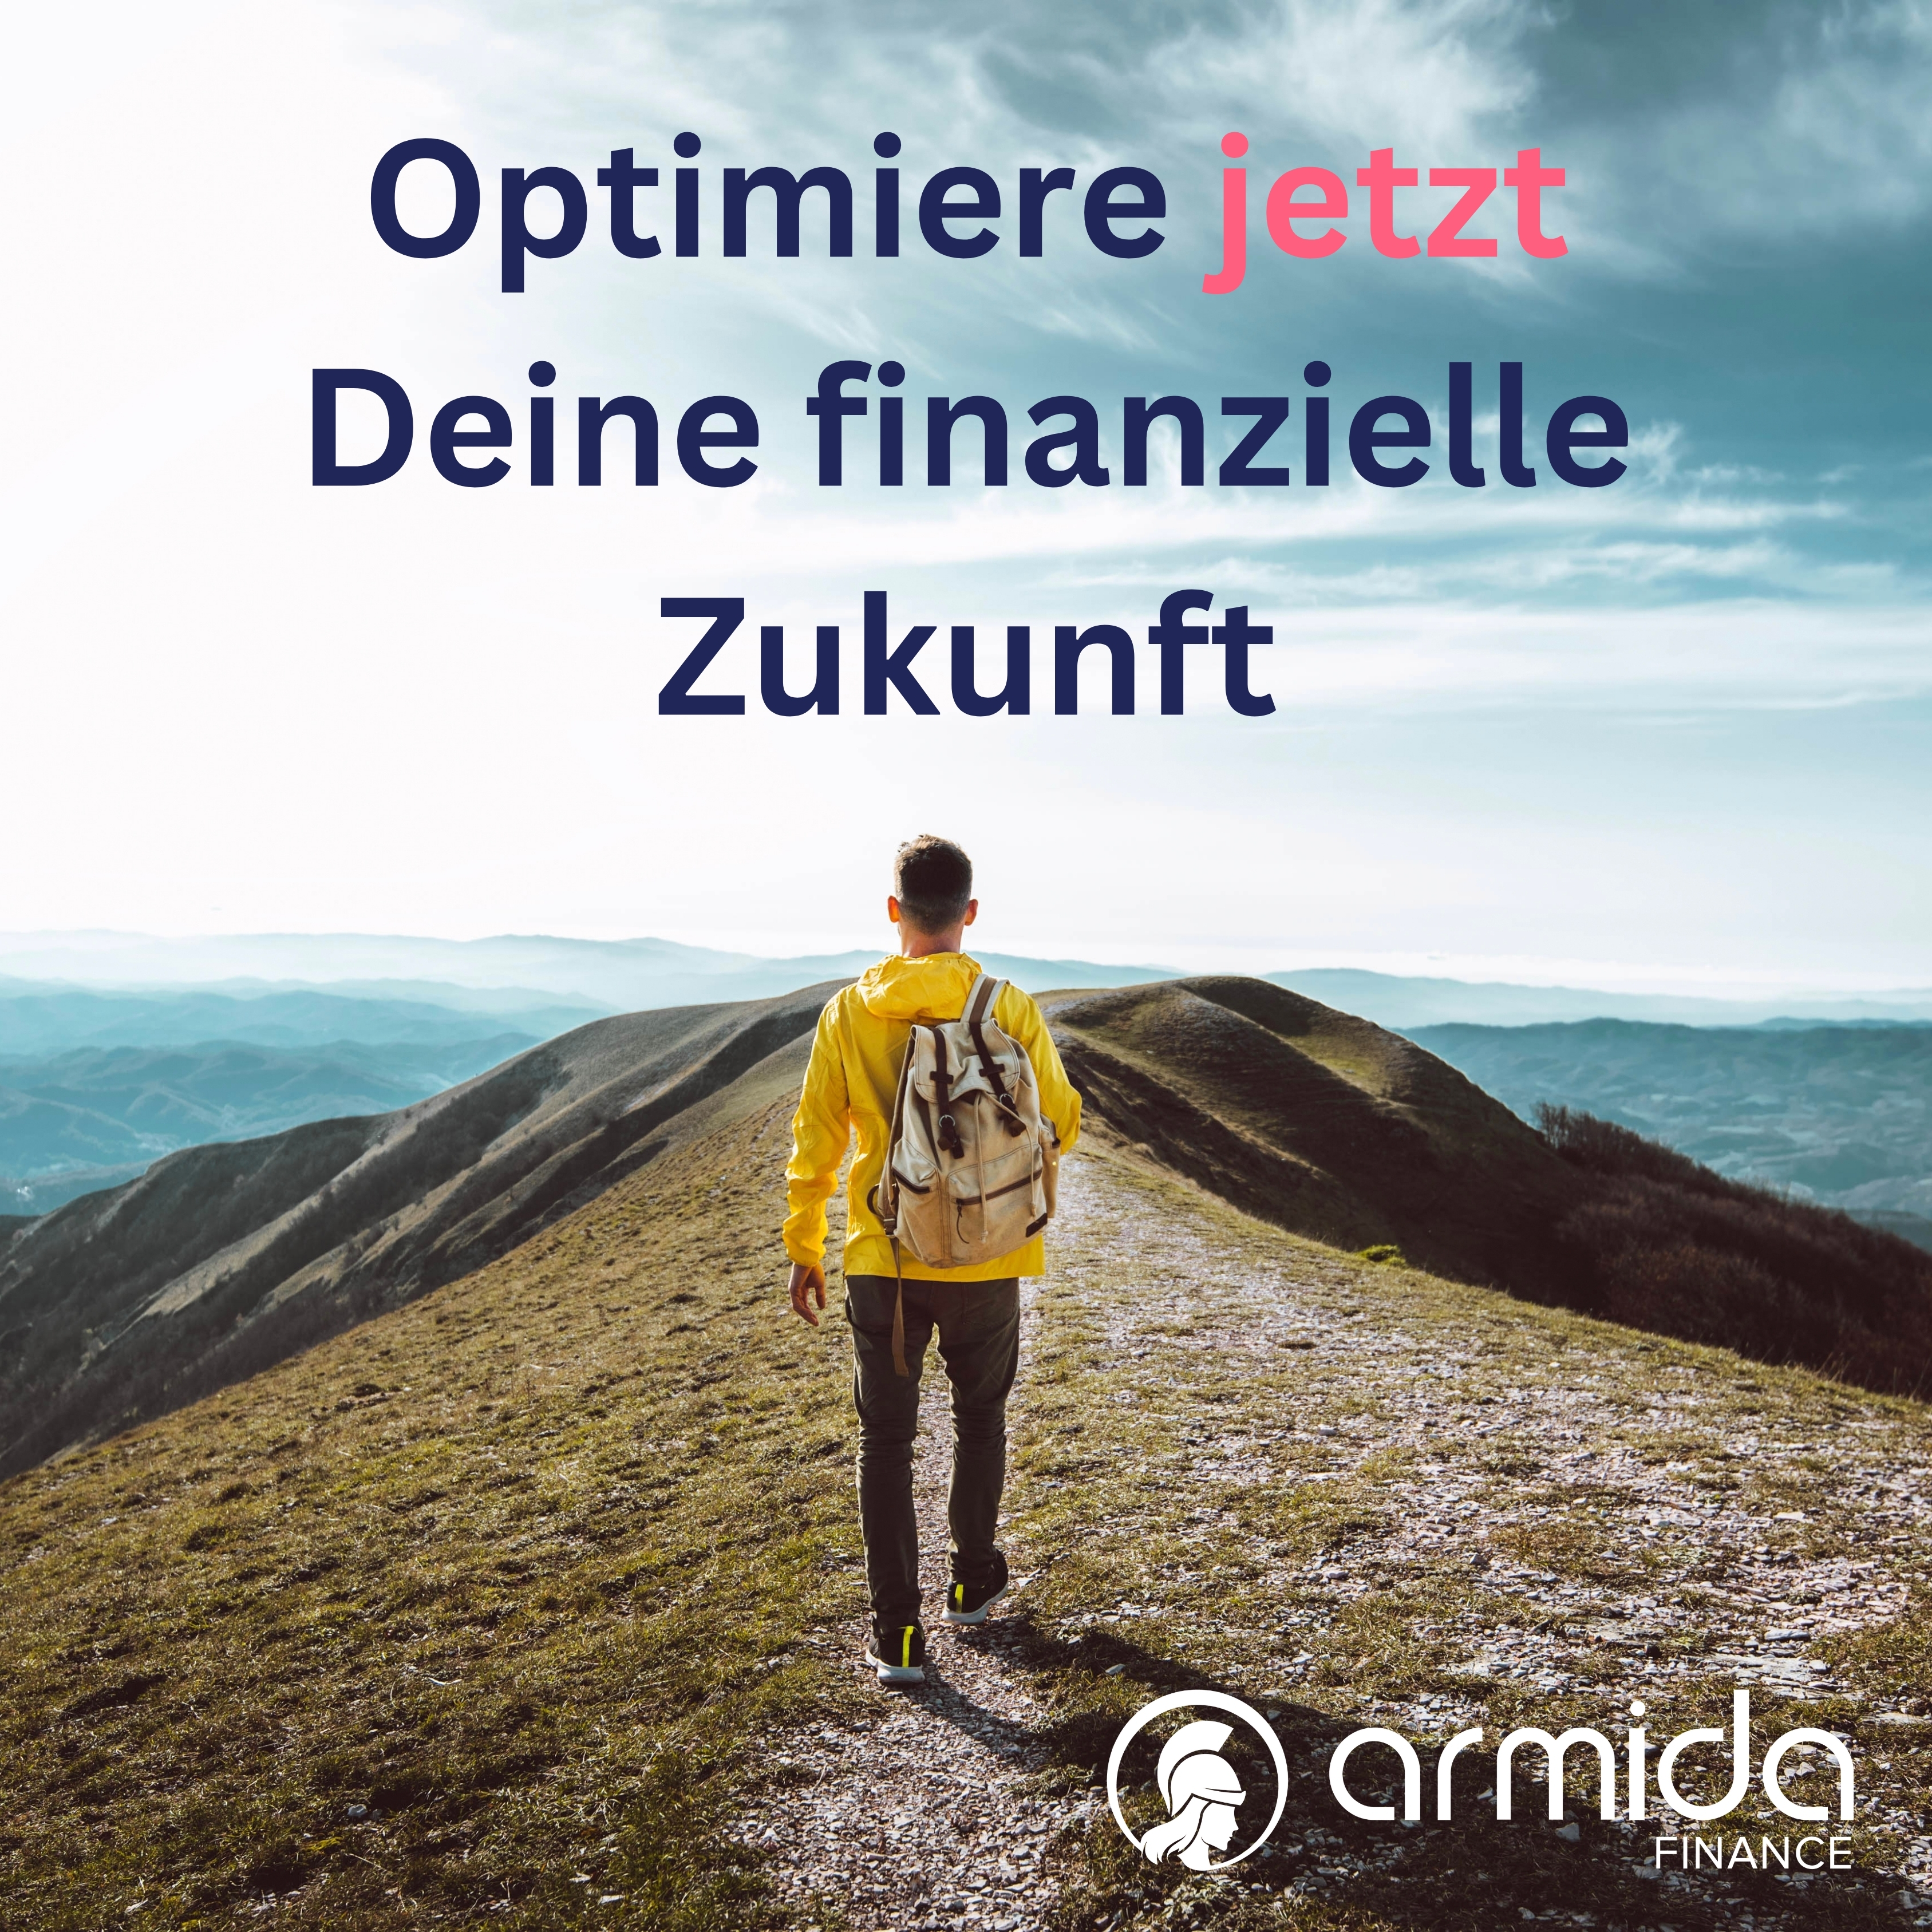 Optimiere